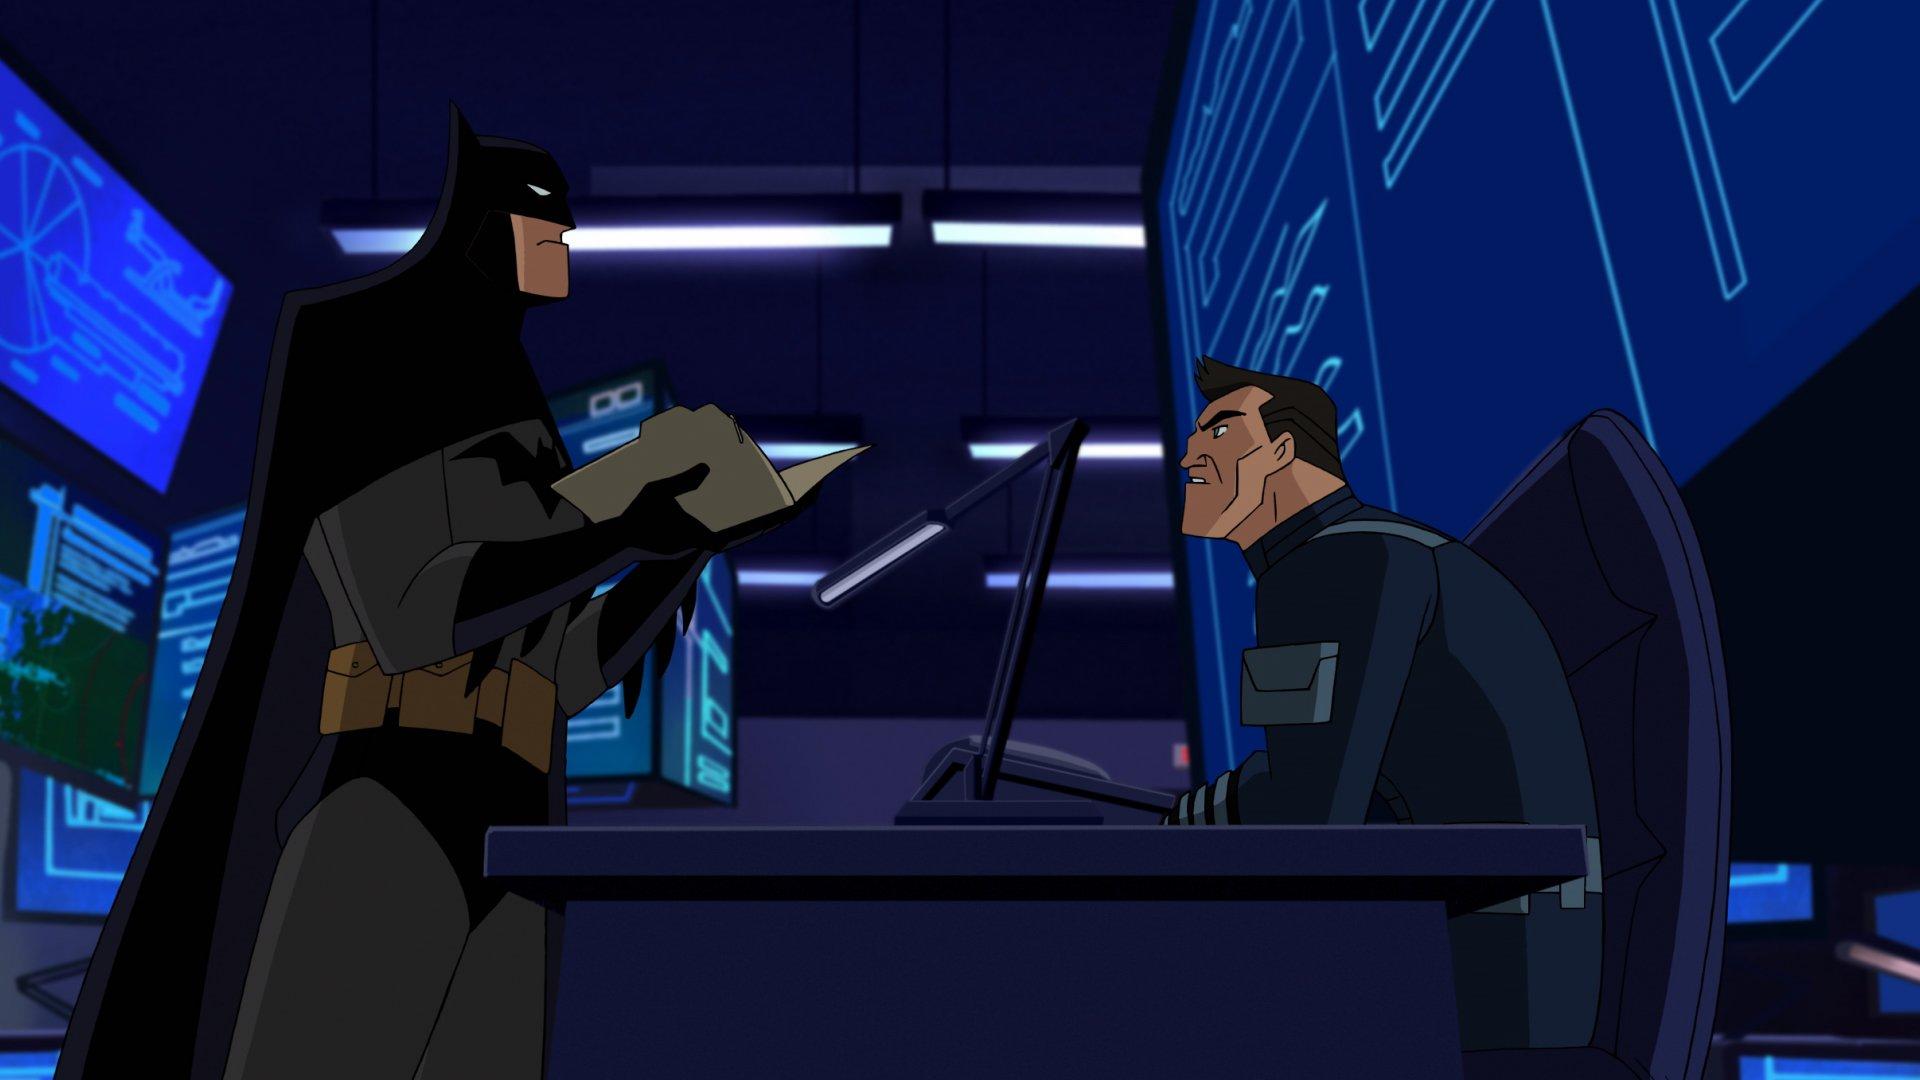 Continue below for a gallery of officially released images from the Batman ...